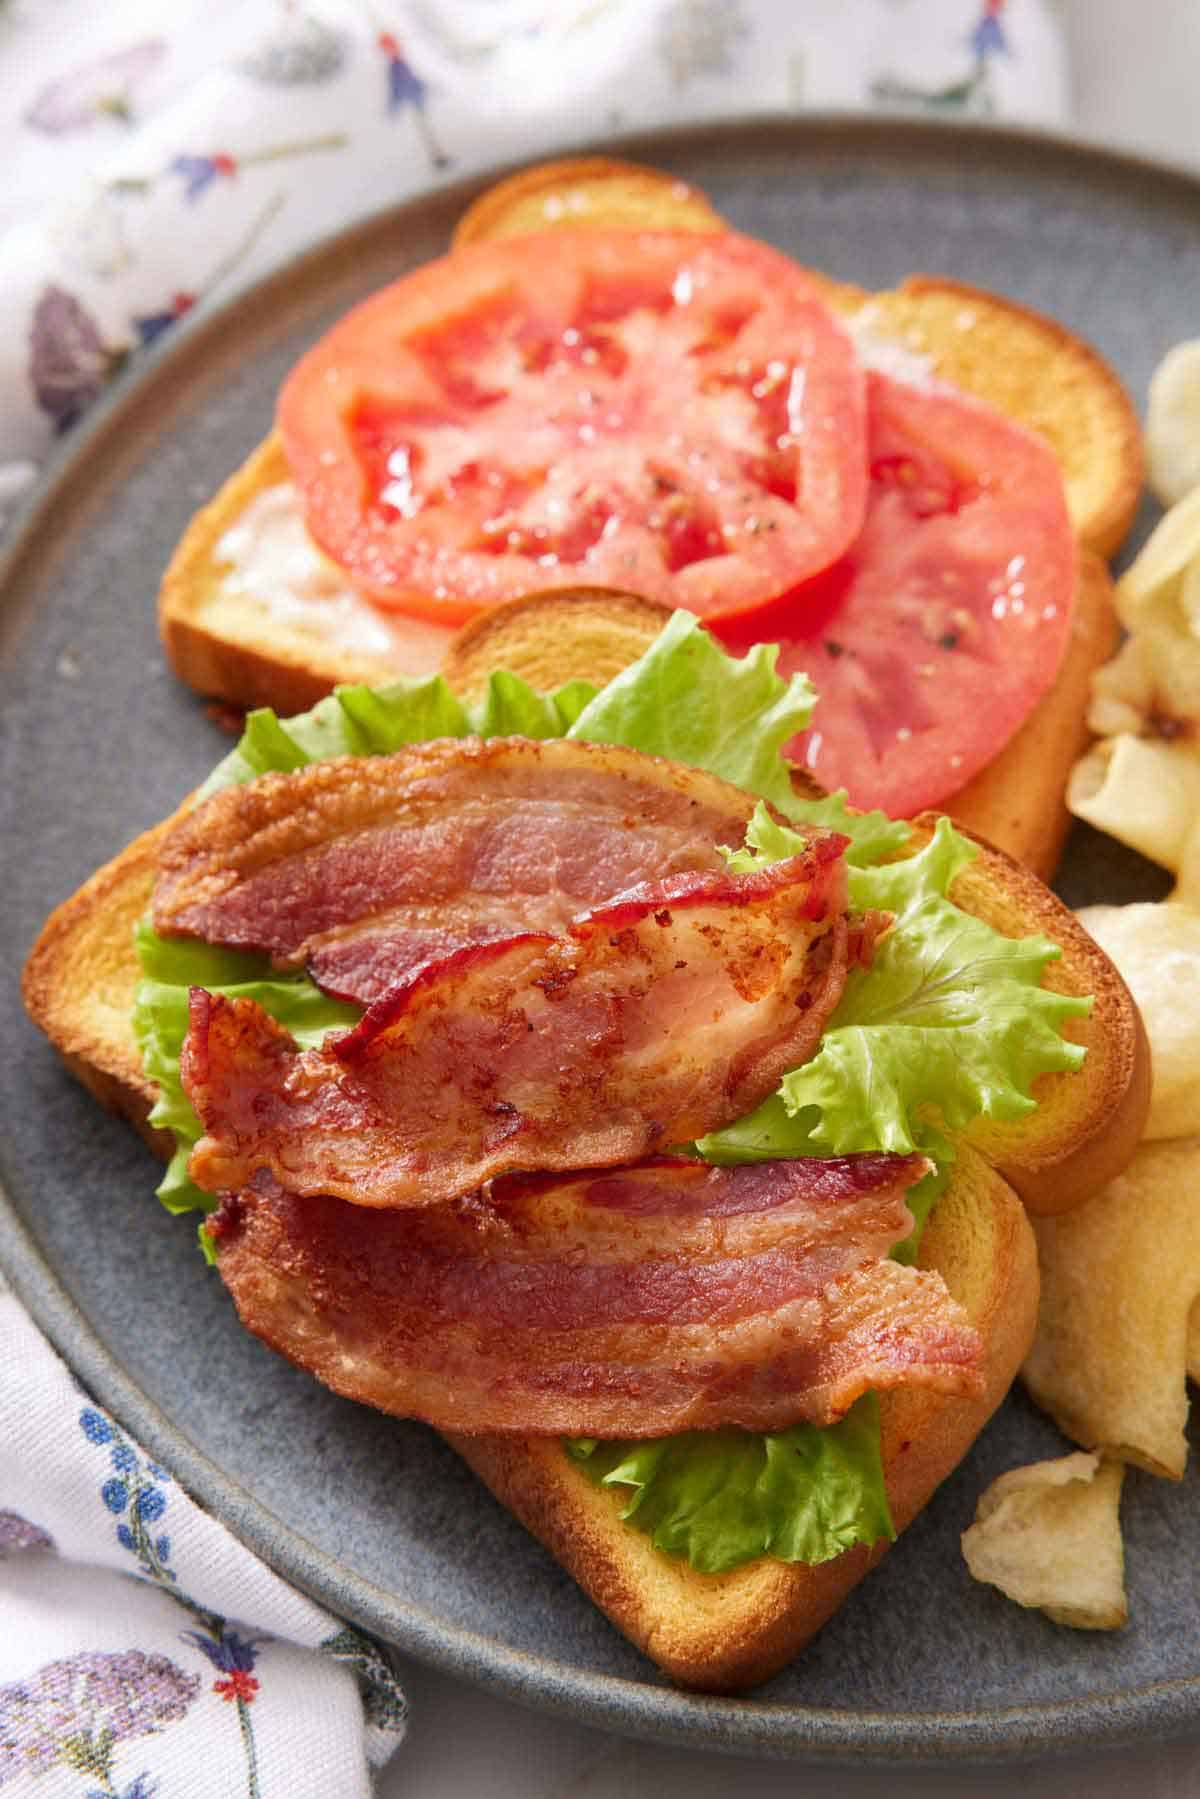 A plate with air fryer bacon on a piece of toast with lettuce and tomatoes on a second toast.